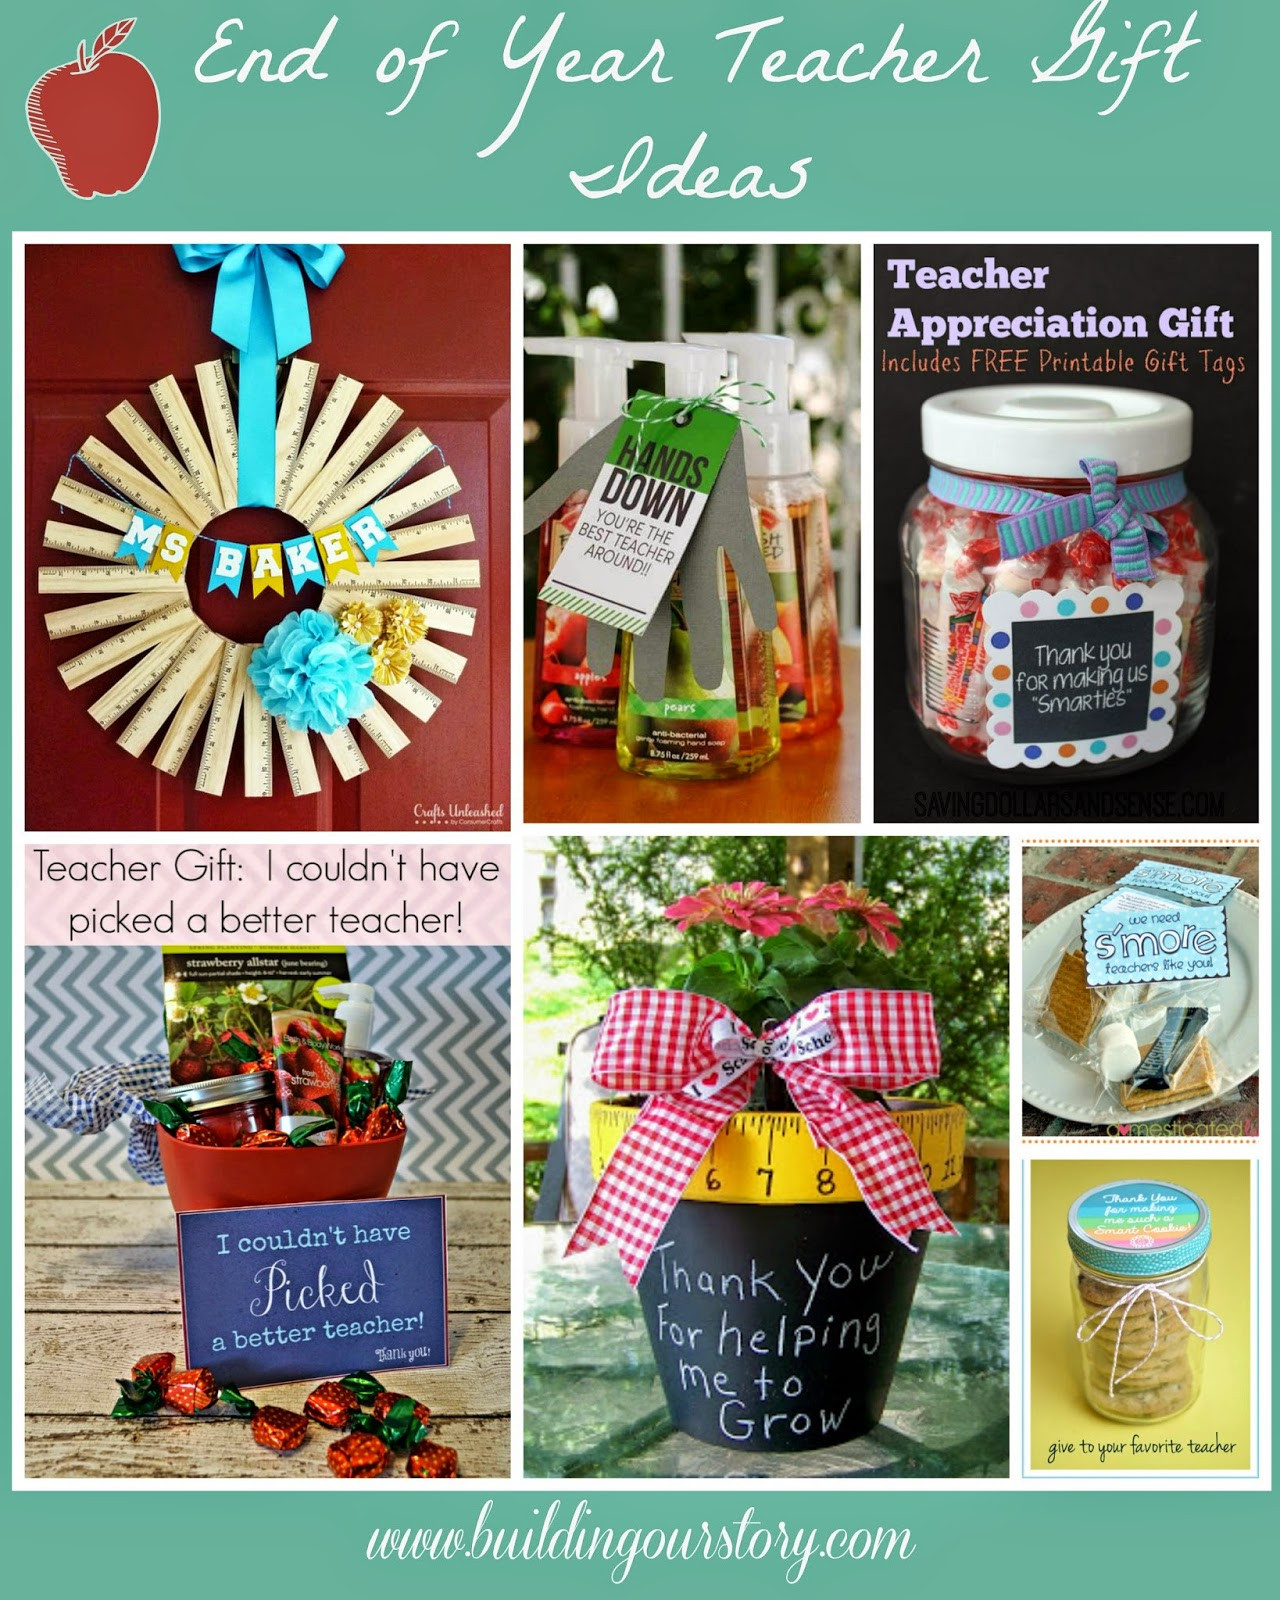 DIY Teacher Gifts End Of Year
 End of the Year Teacher Gift DIY Ideas Building Our Story